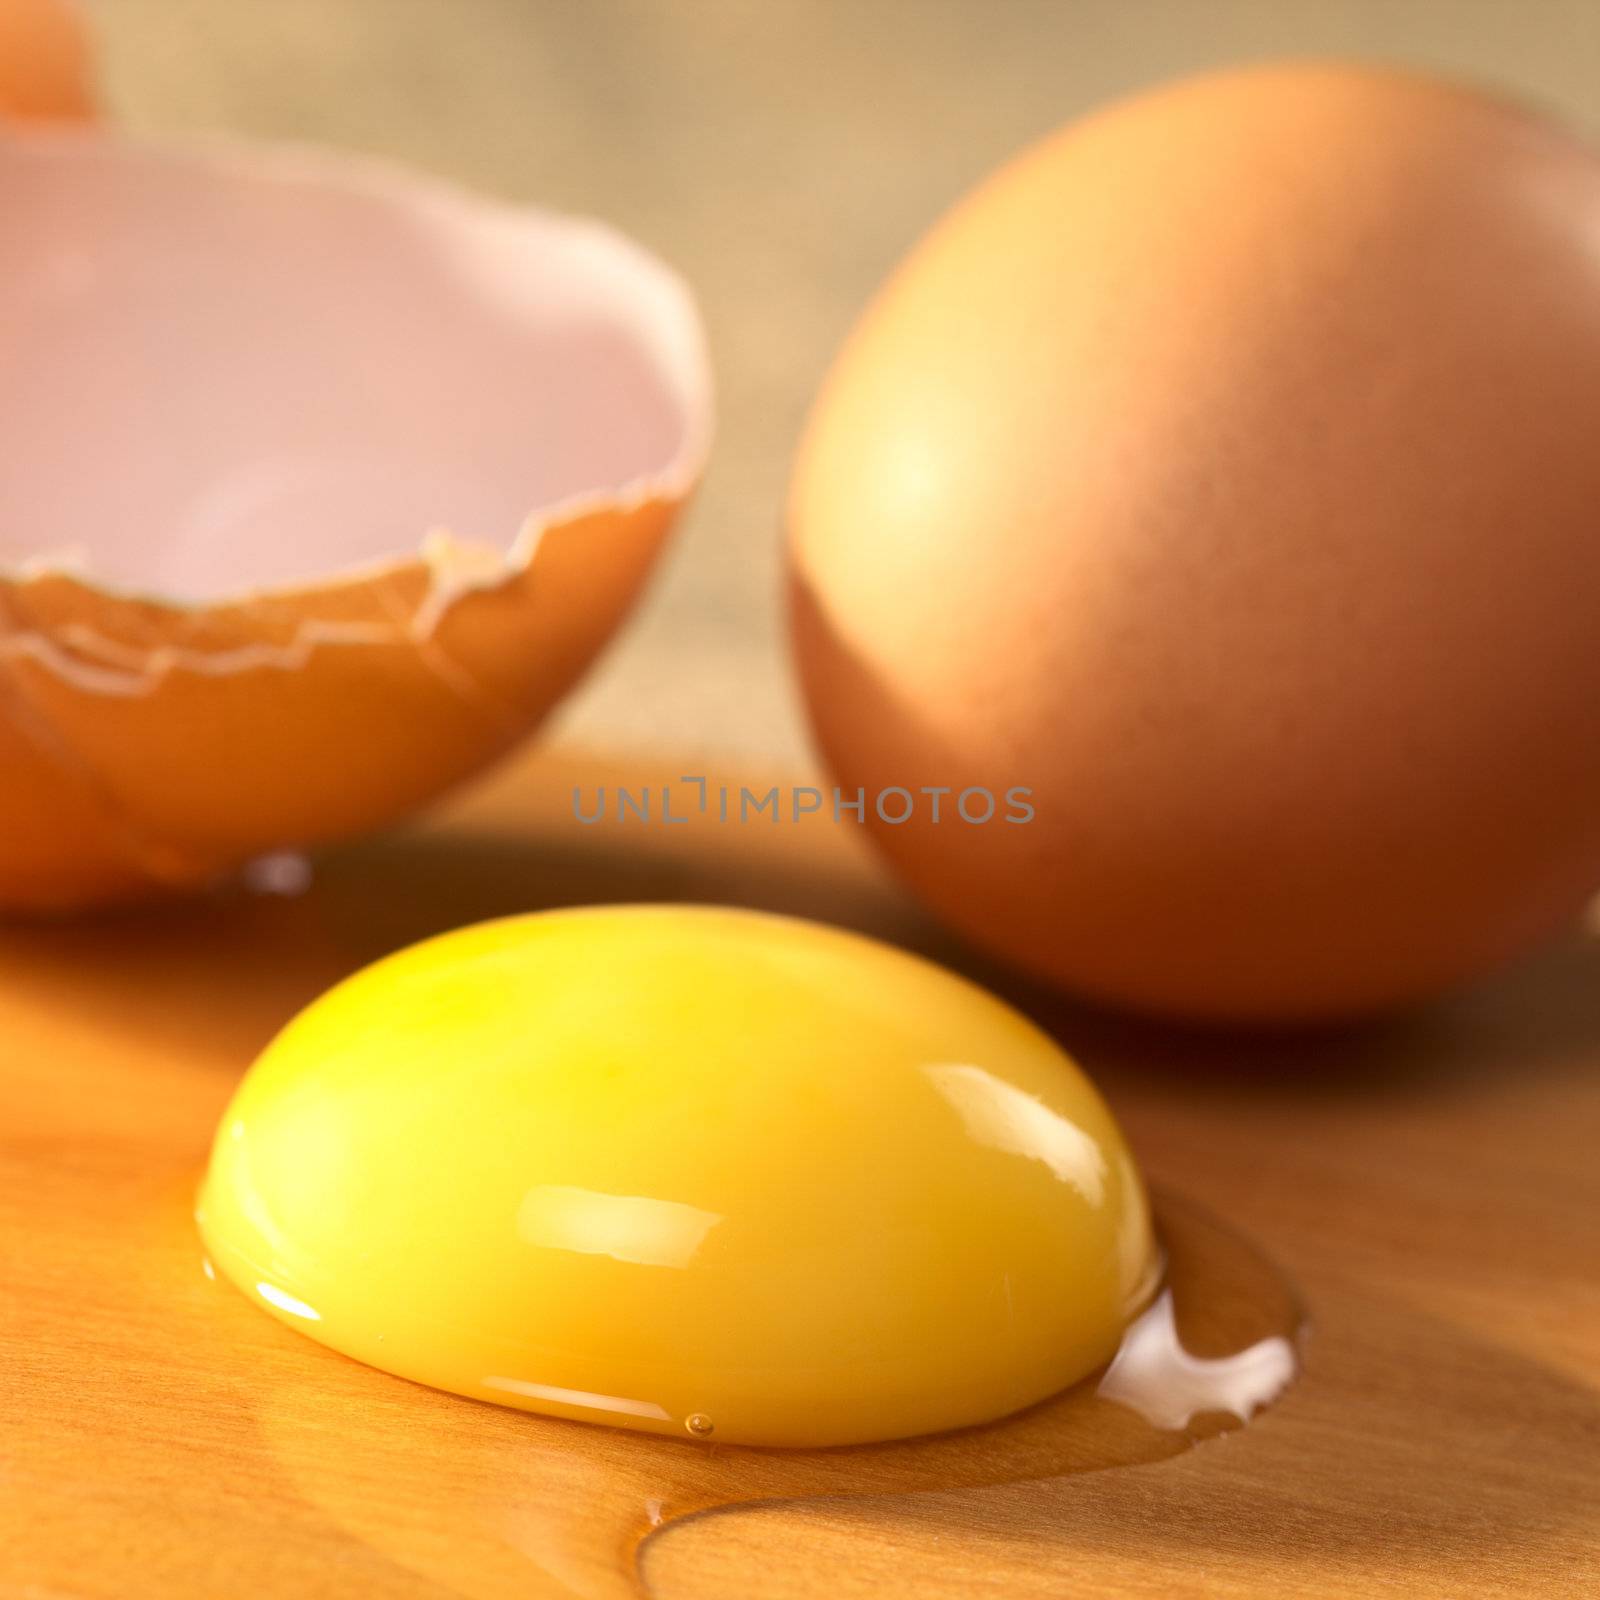 Raw egg yolk and egg white with the cracked open egg shell and a complete egg in the back (Selective Focus, Focus on the front of the egg yolk)